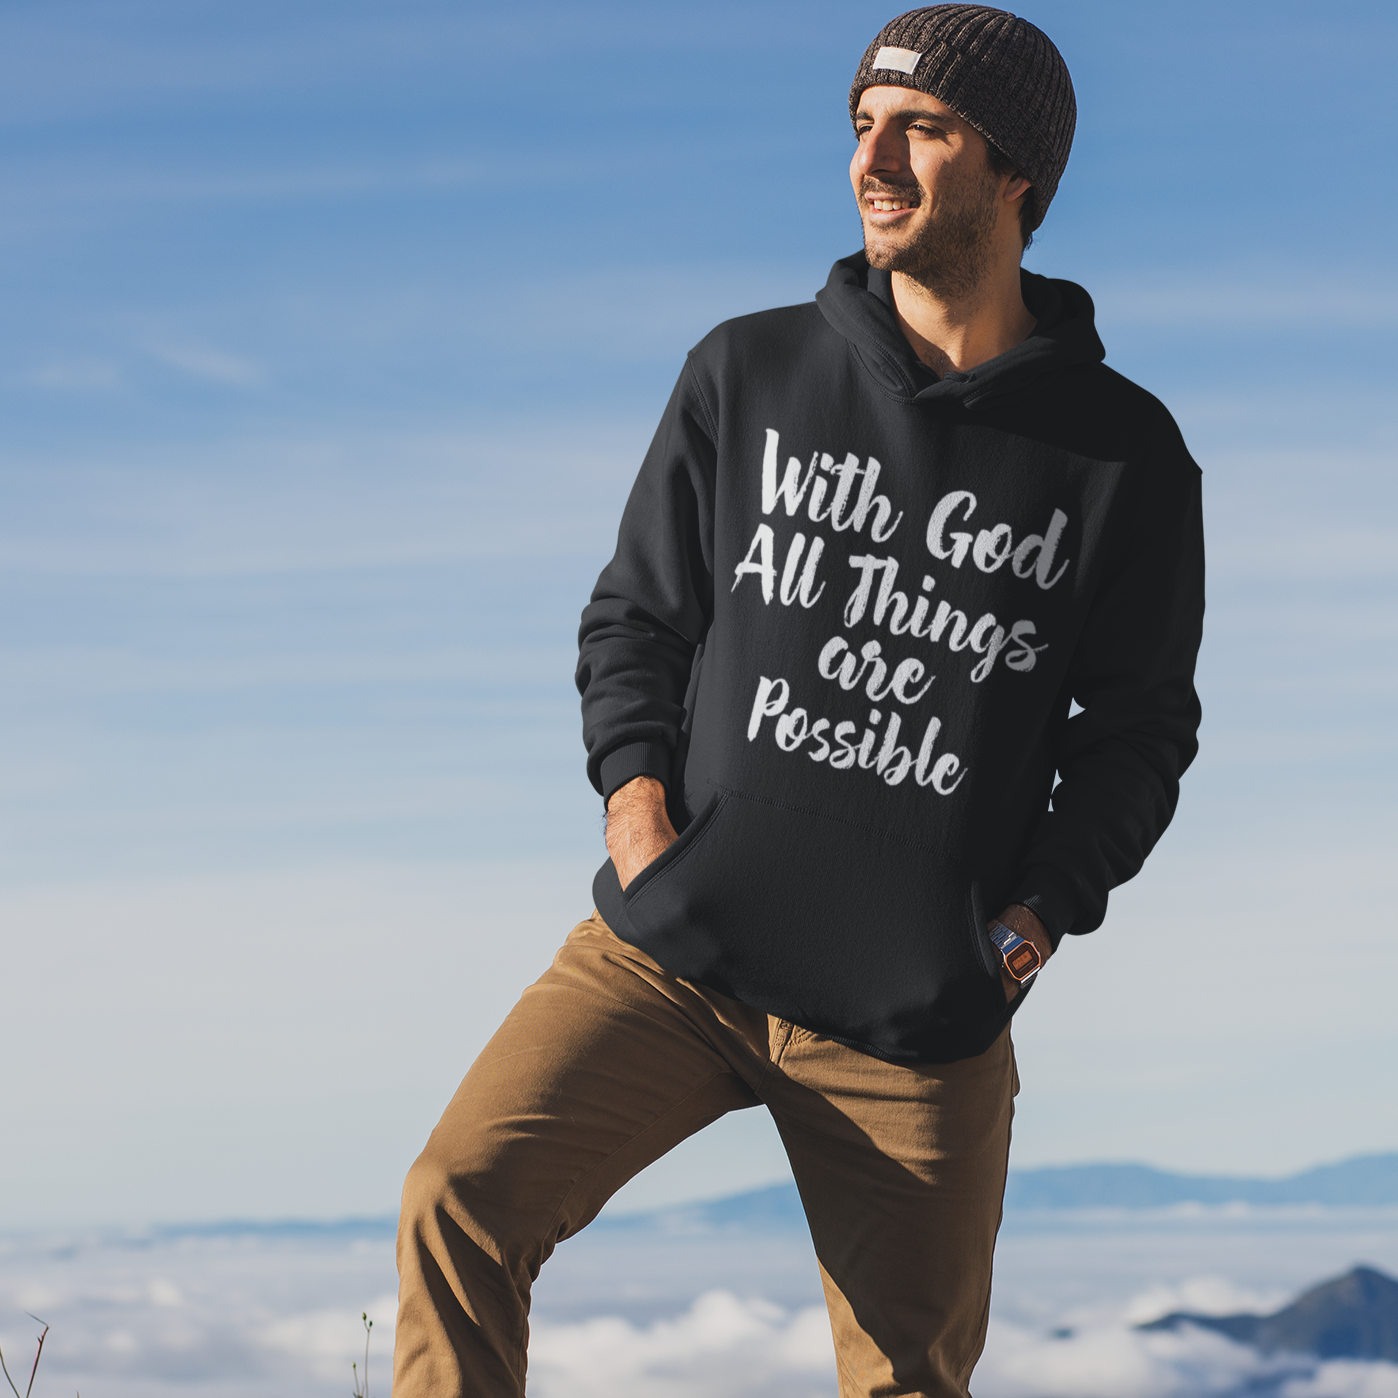 Christian Hoodie | With God All Things Are Possible | Unisex